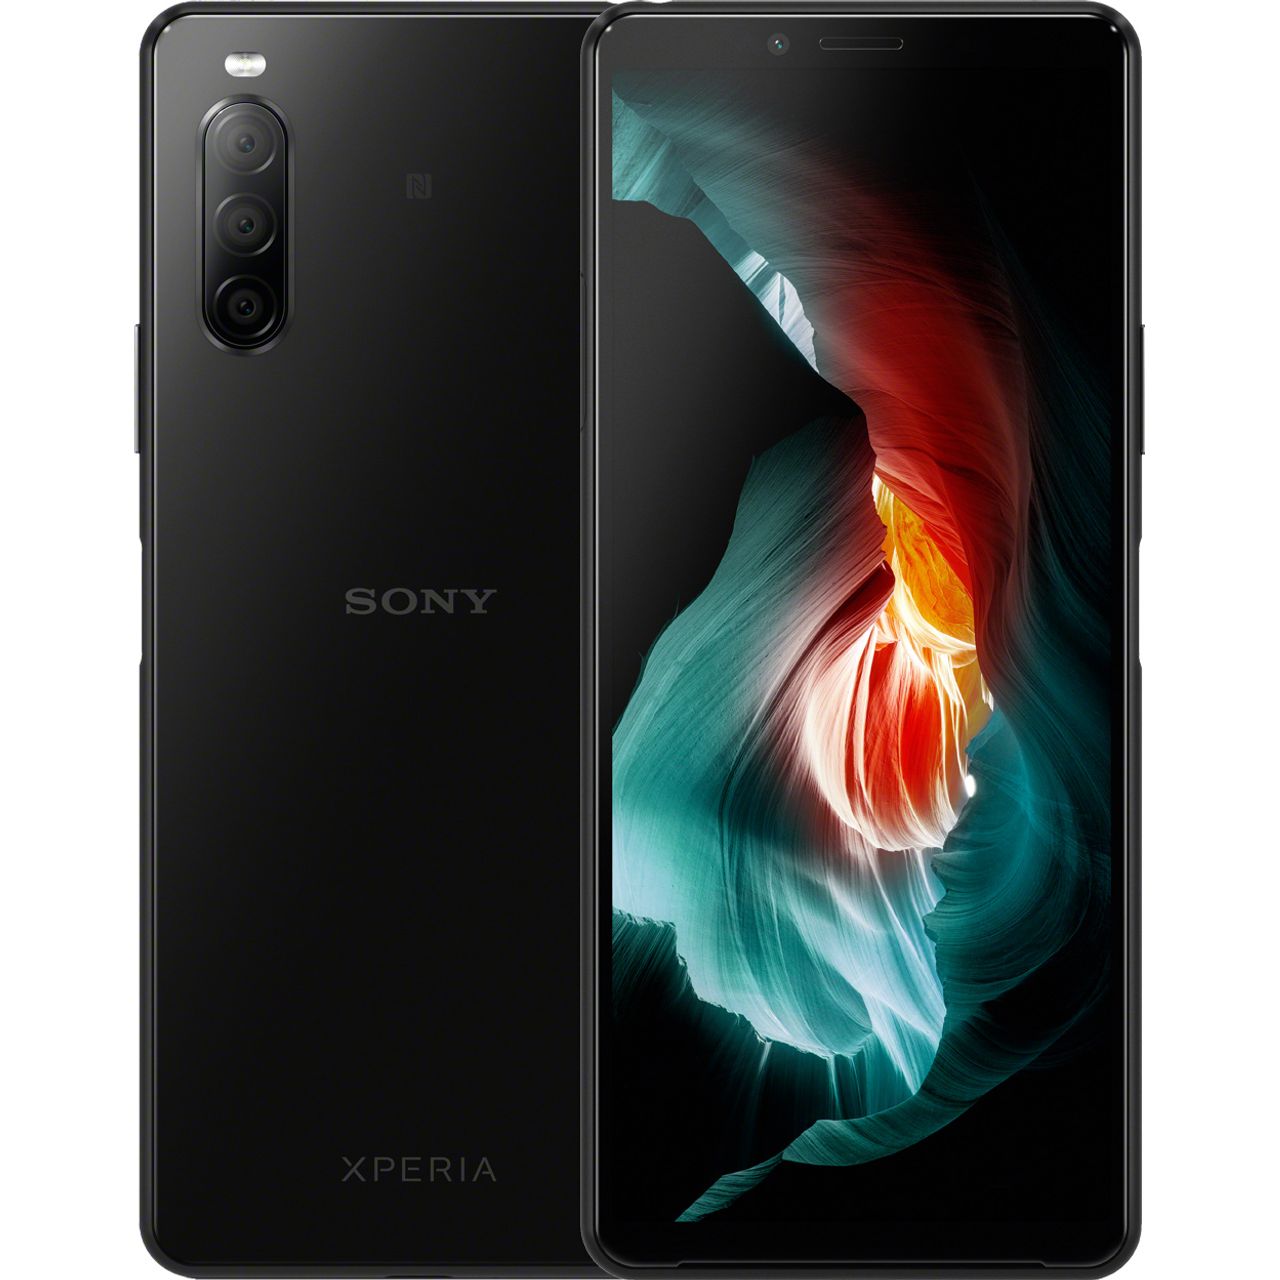 Sony Xperia 10 II Smartphone in Black Review